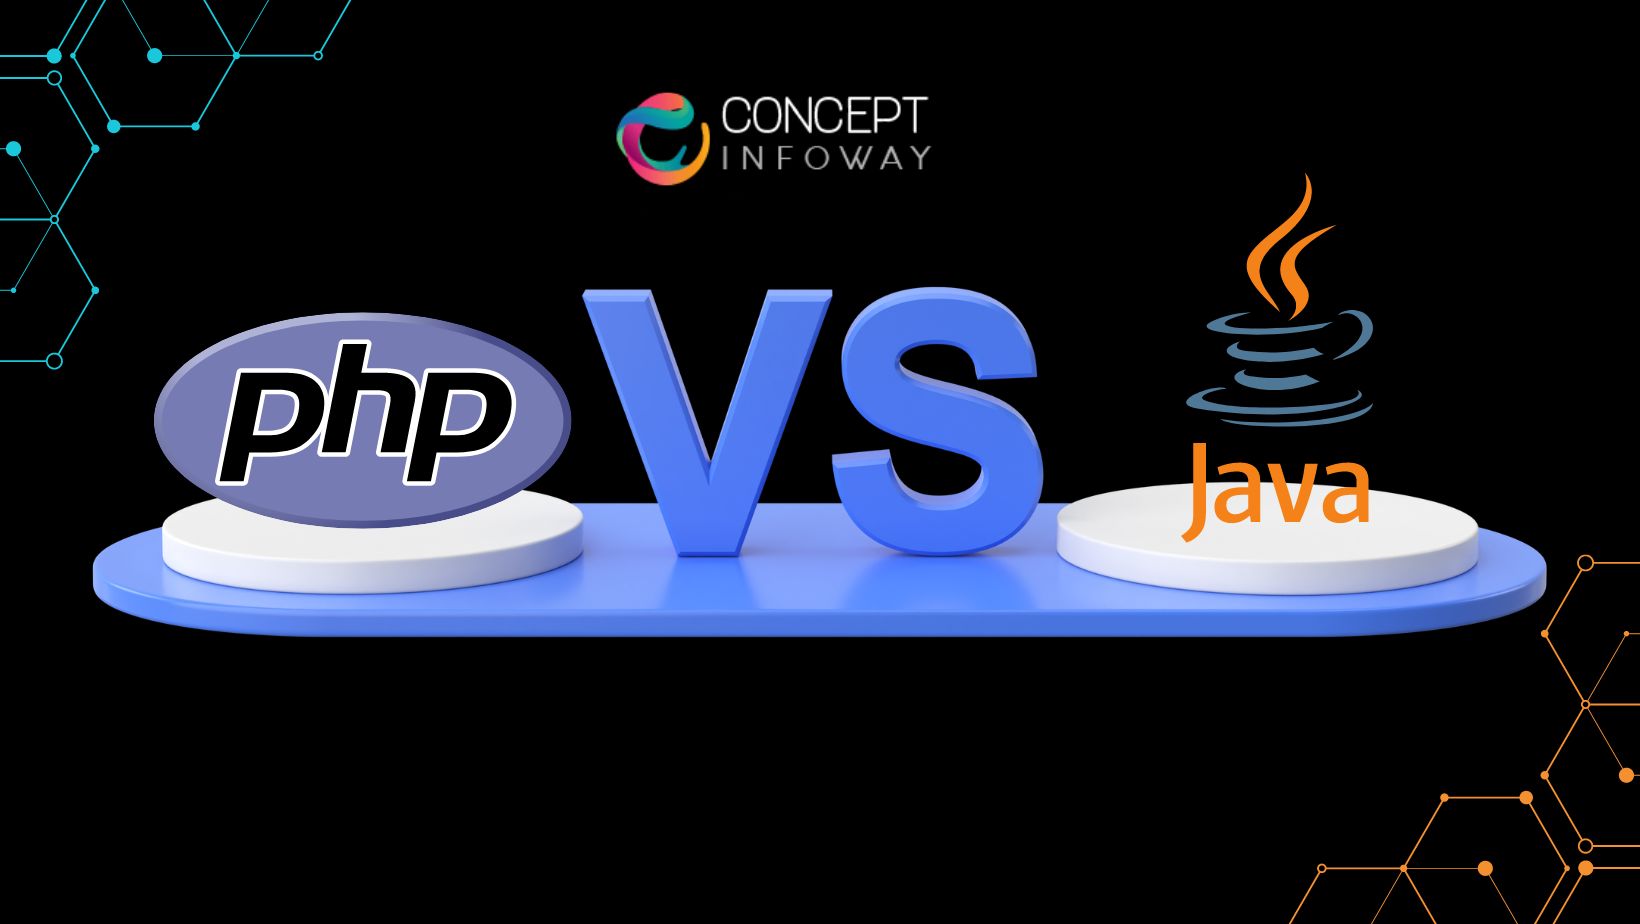 Comparing PHP vs Java - Concept Infoway